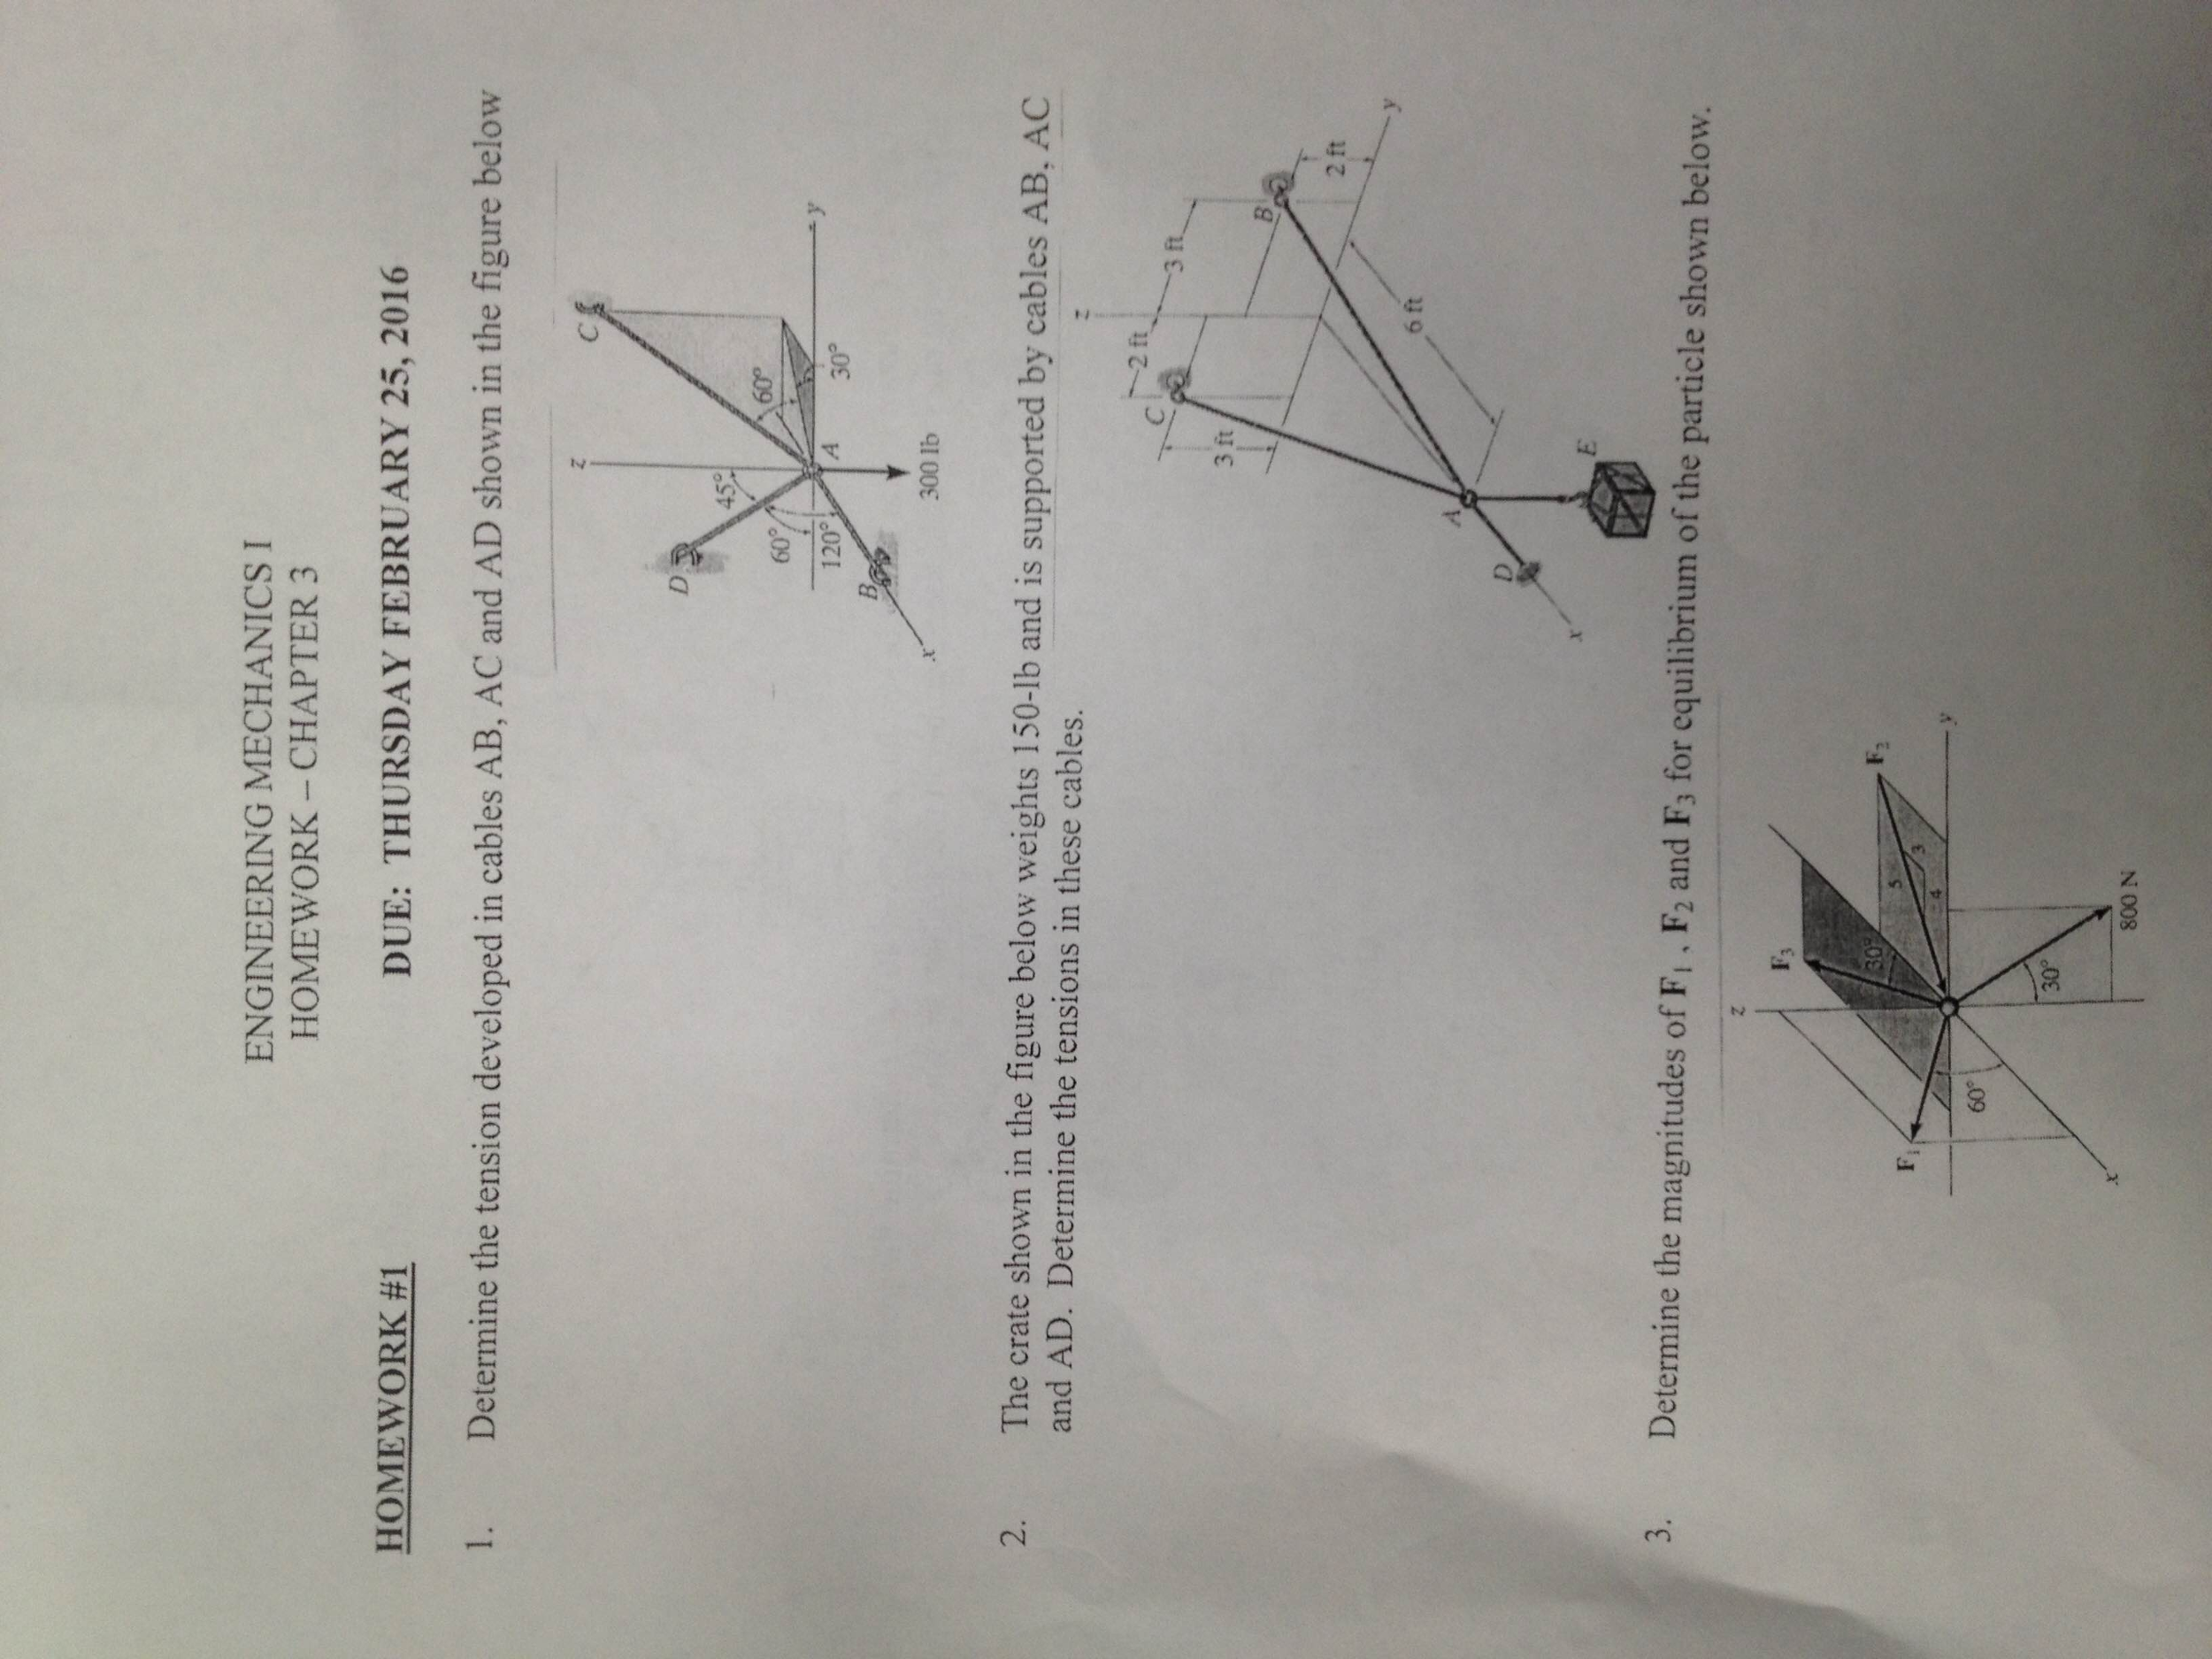 Solved: Determine The Tension Developed In Cables AB, AC A ...